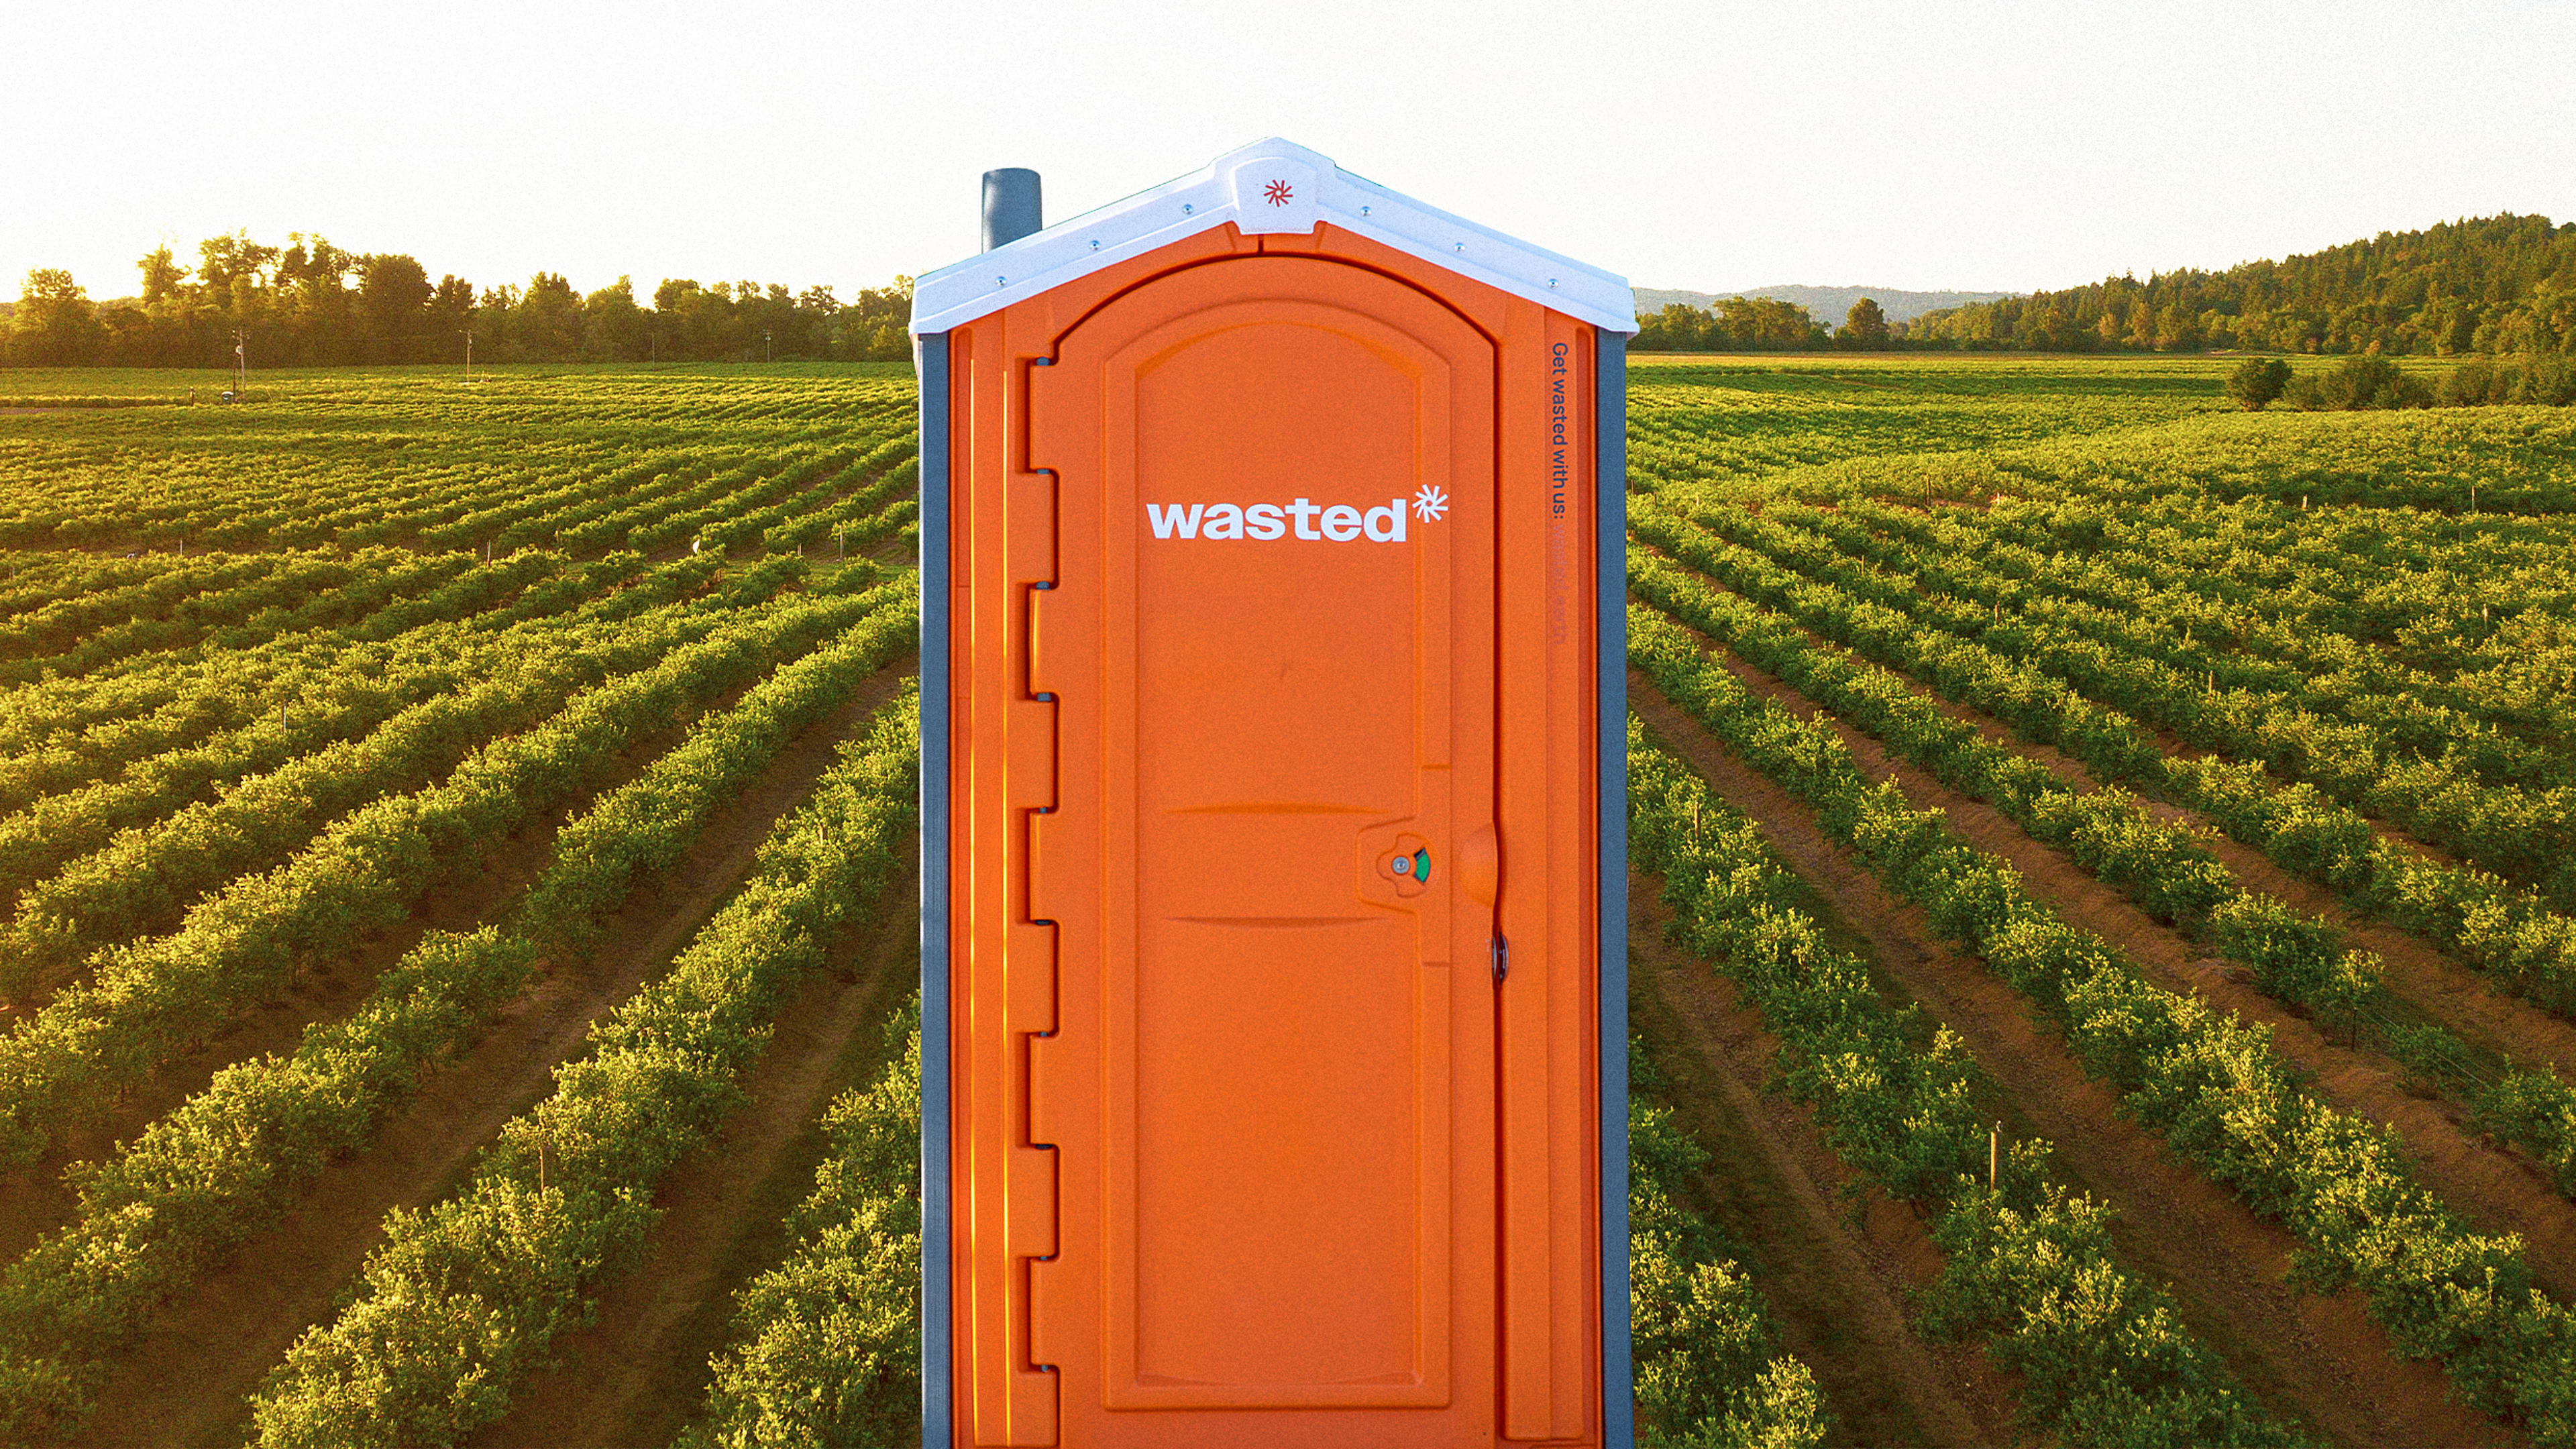 No one likes using a port-a-potty, but at least this one makes fertilizer